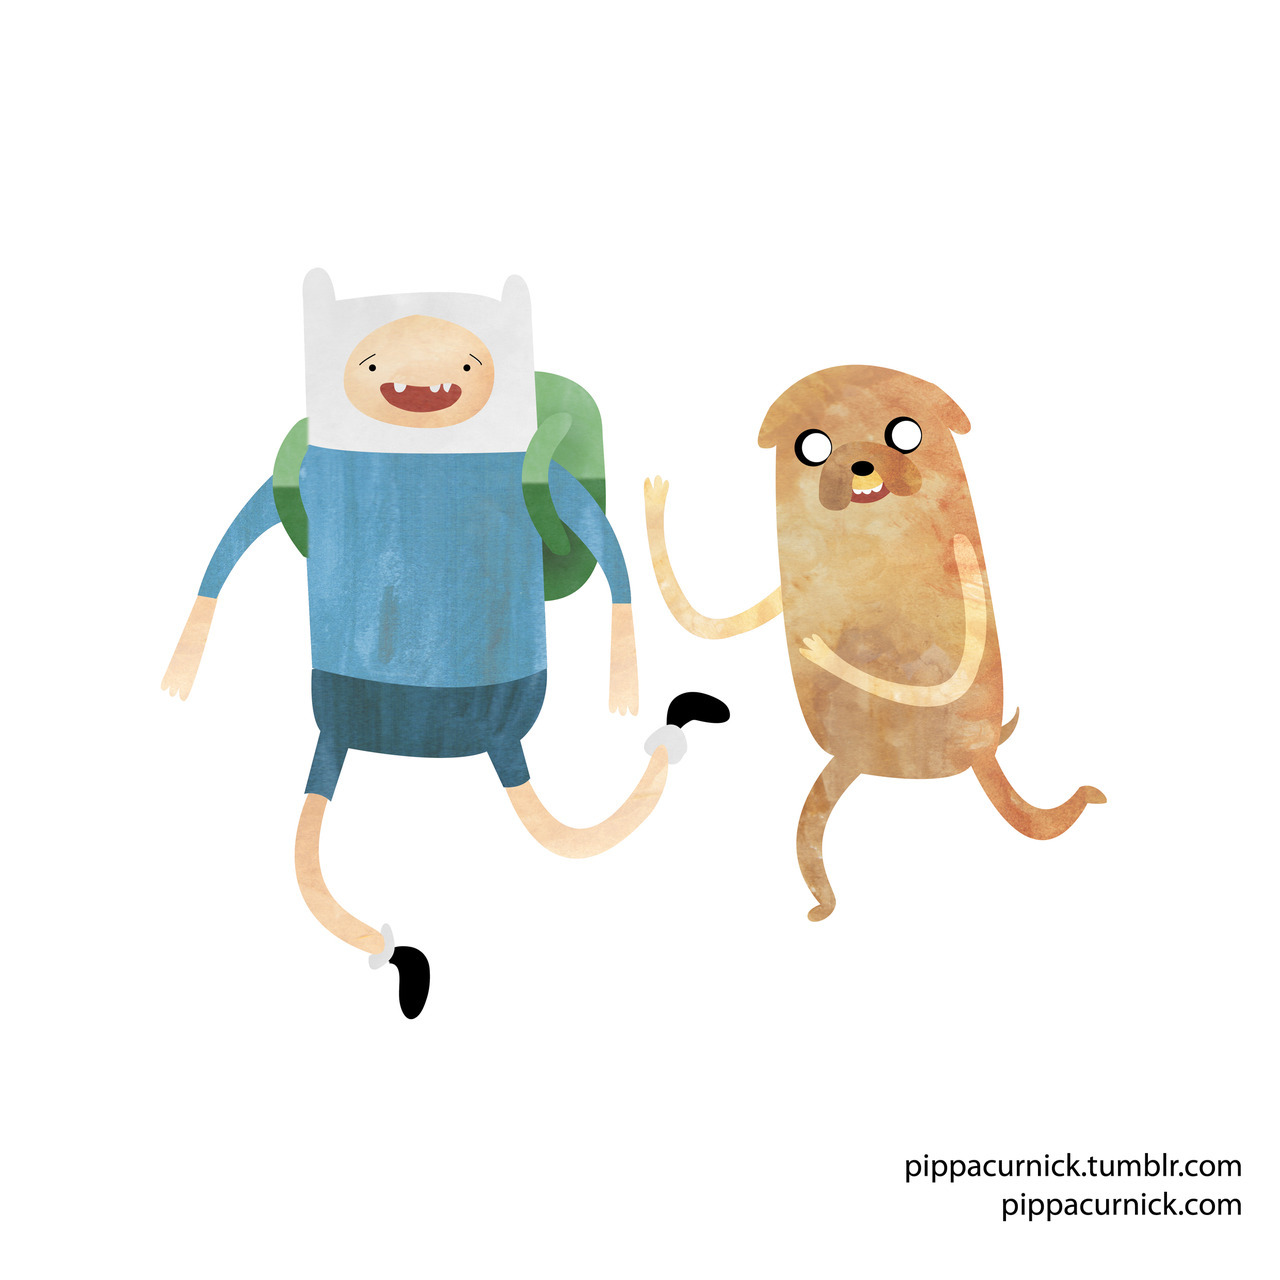 Adventure Time! www.pippacurnick.tumblr.com www.pippacurnick.com